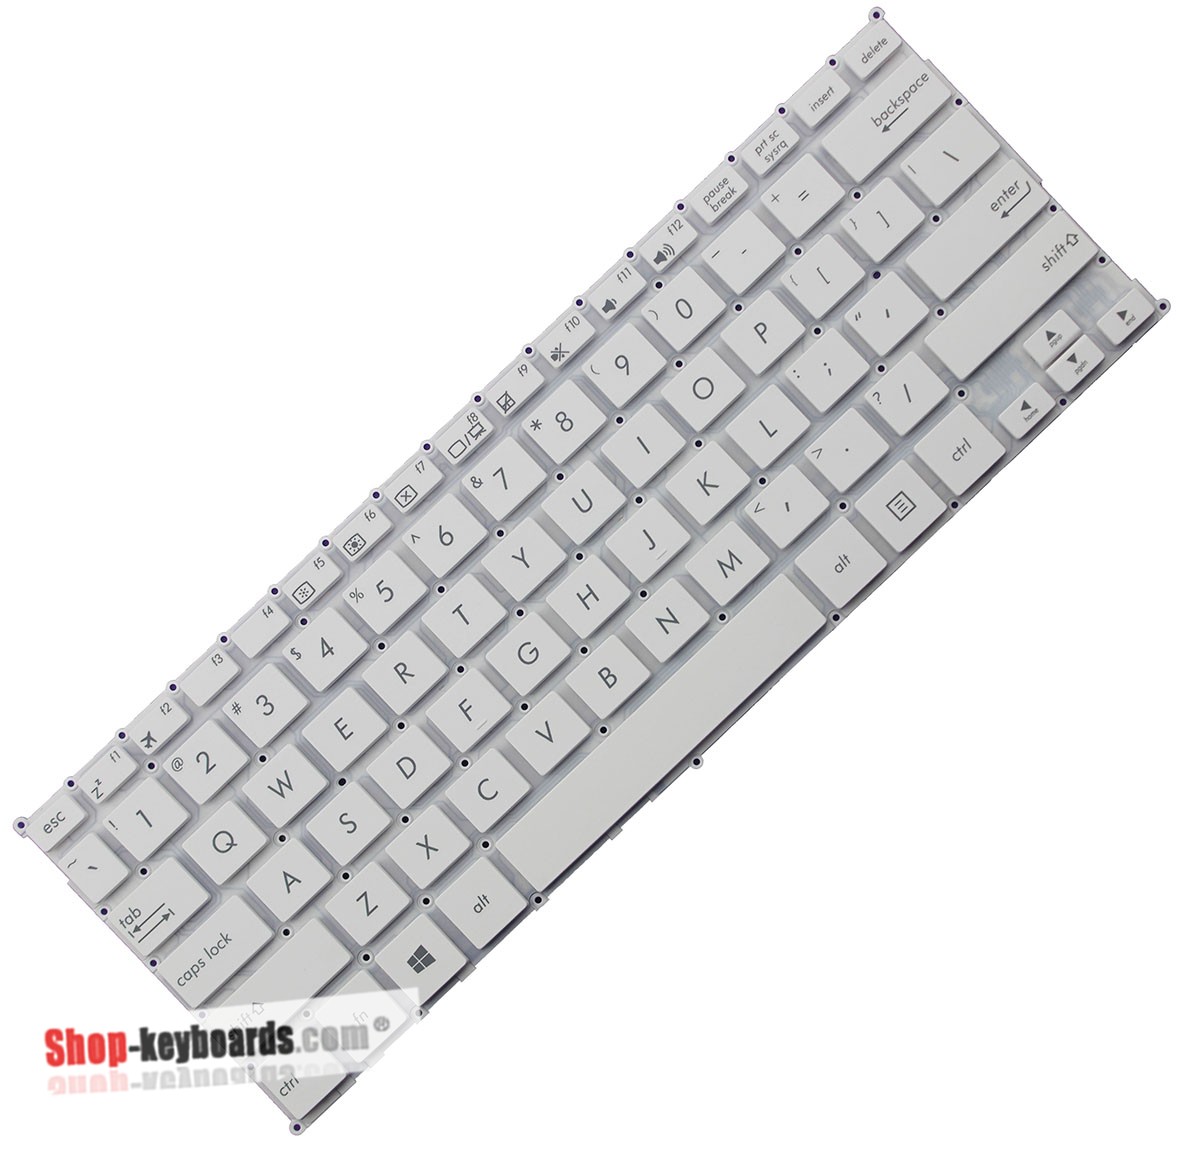 Asus 0KNL0-1123IT00 Keyboard replacement